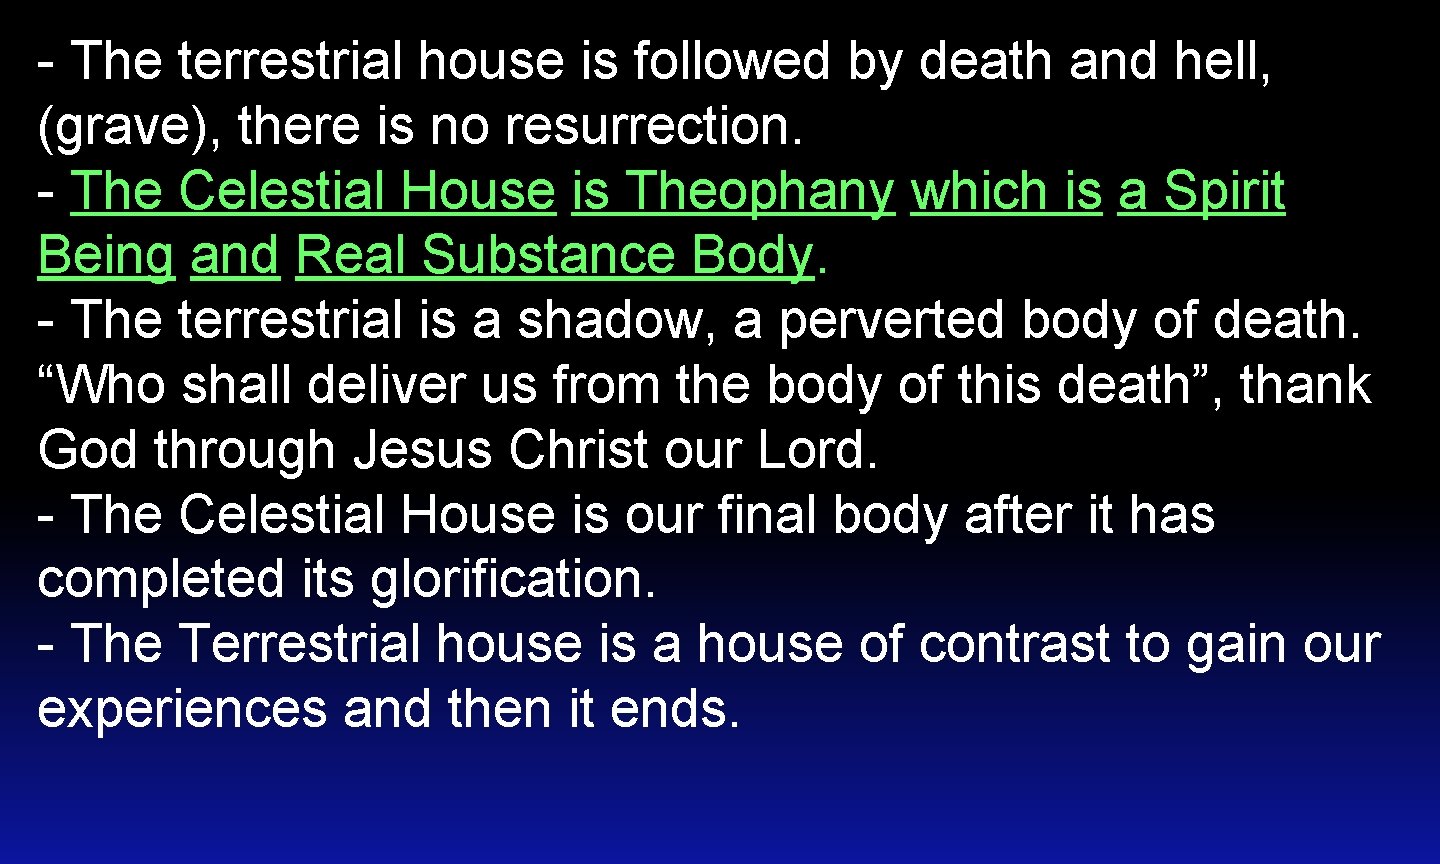 - The terrestrial house is followed by death and hell, (grave), there is no